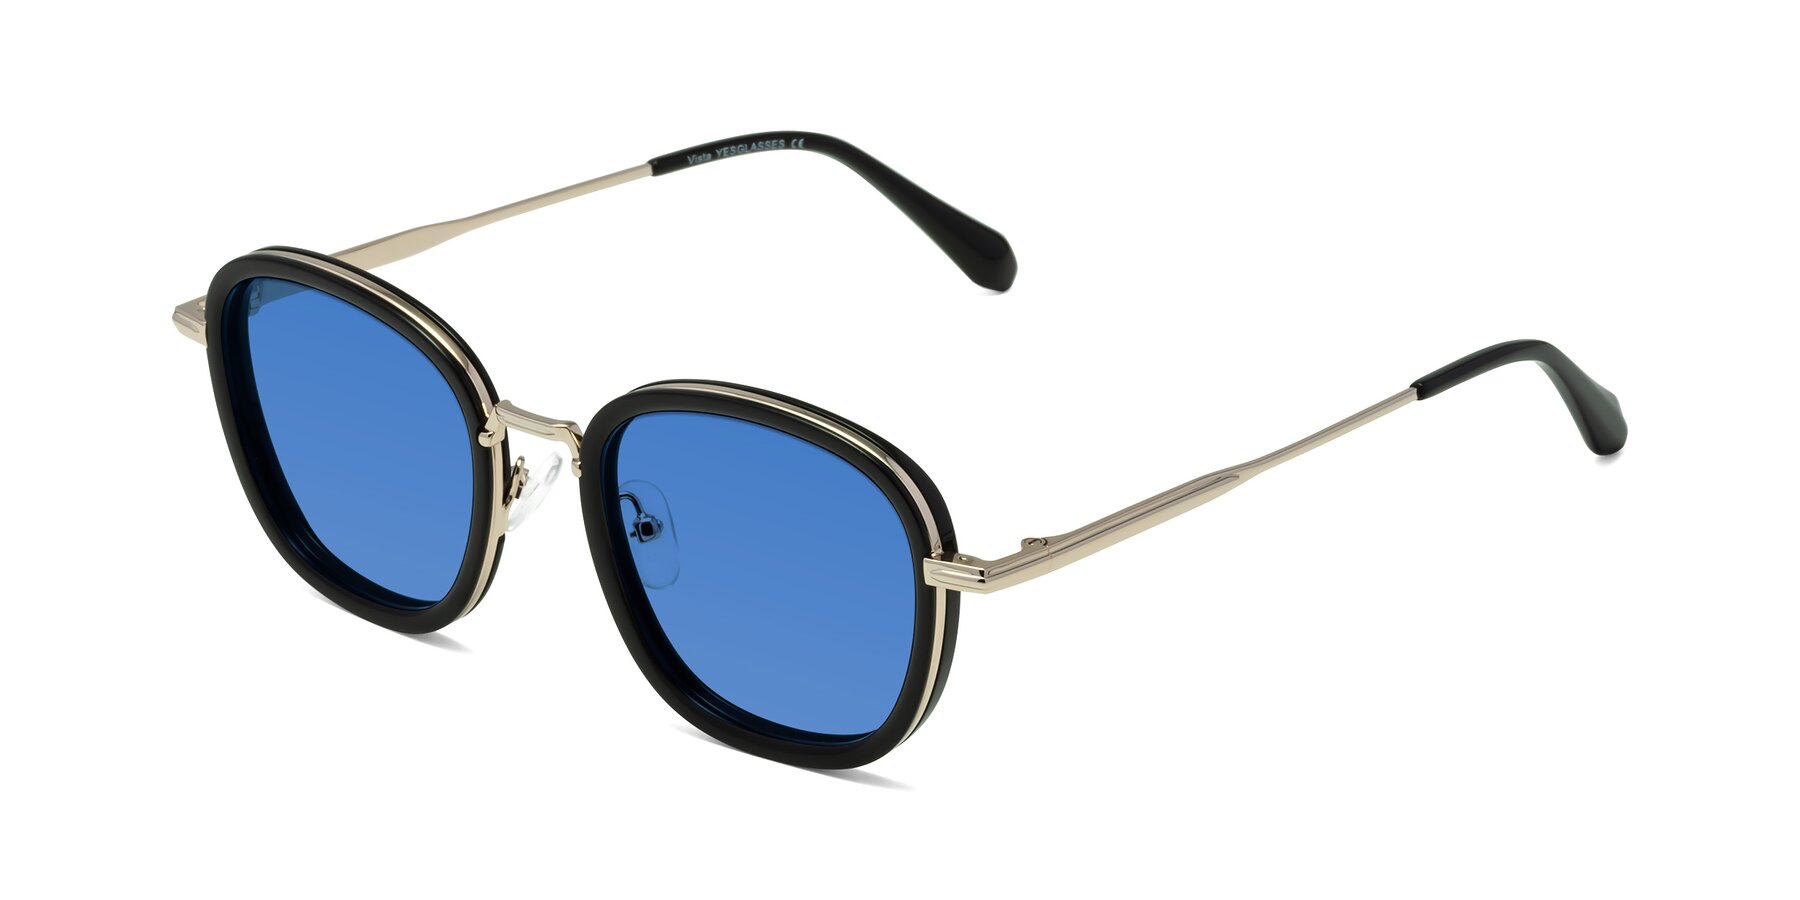 Angle of Vista in Black-Light Gold with Blue Tinted Lenses